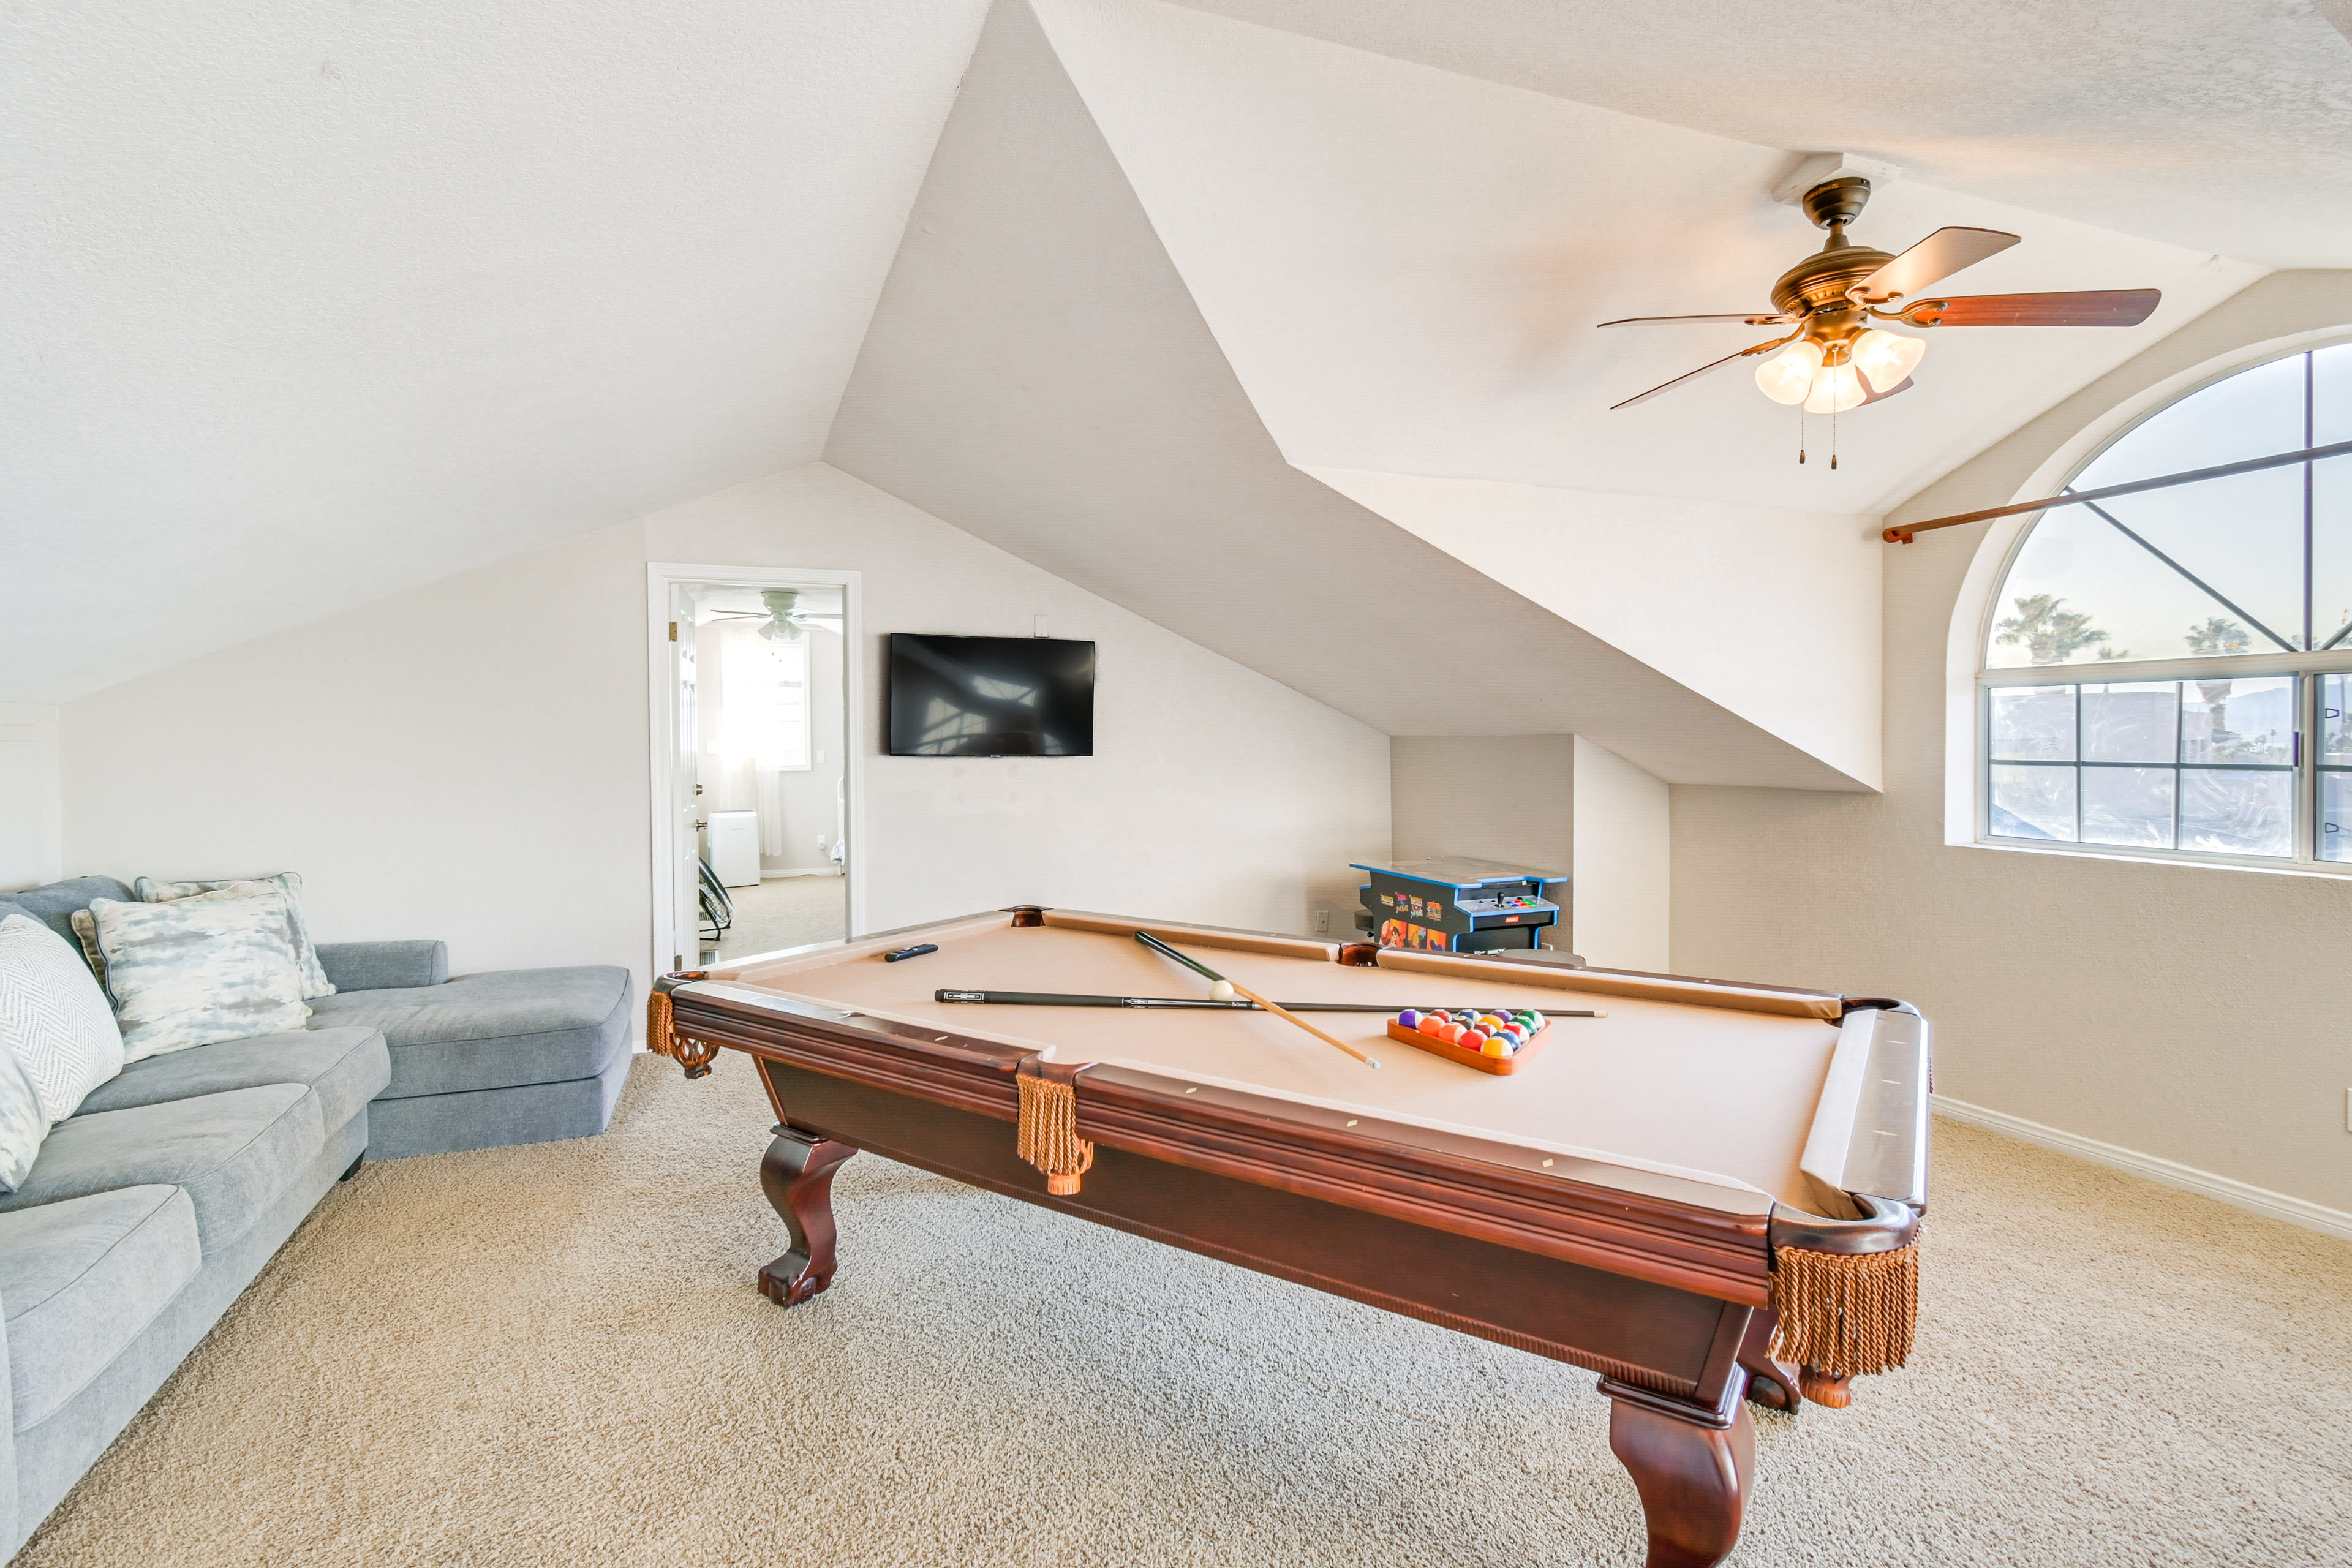 Game Room | Smart TV | Pool Table | Arcade Game